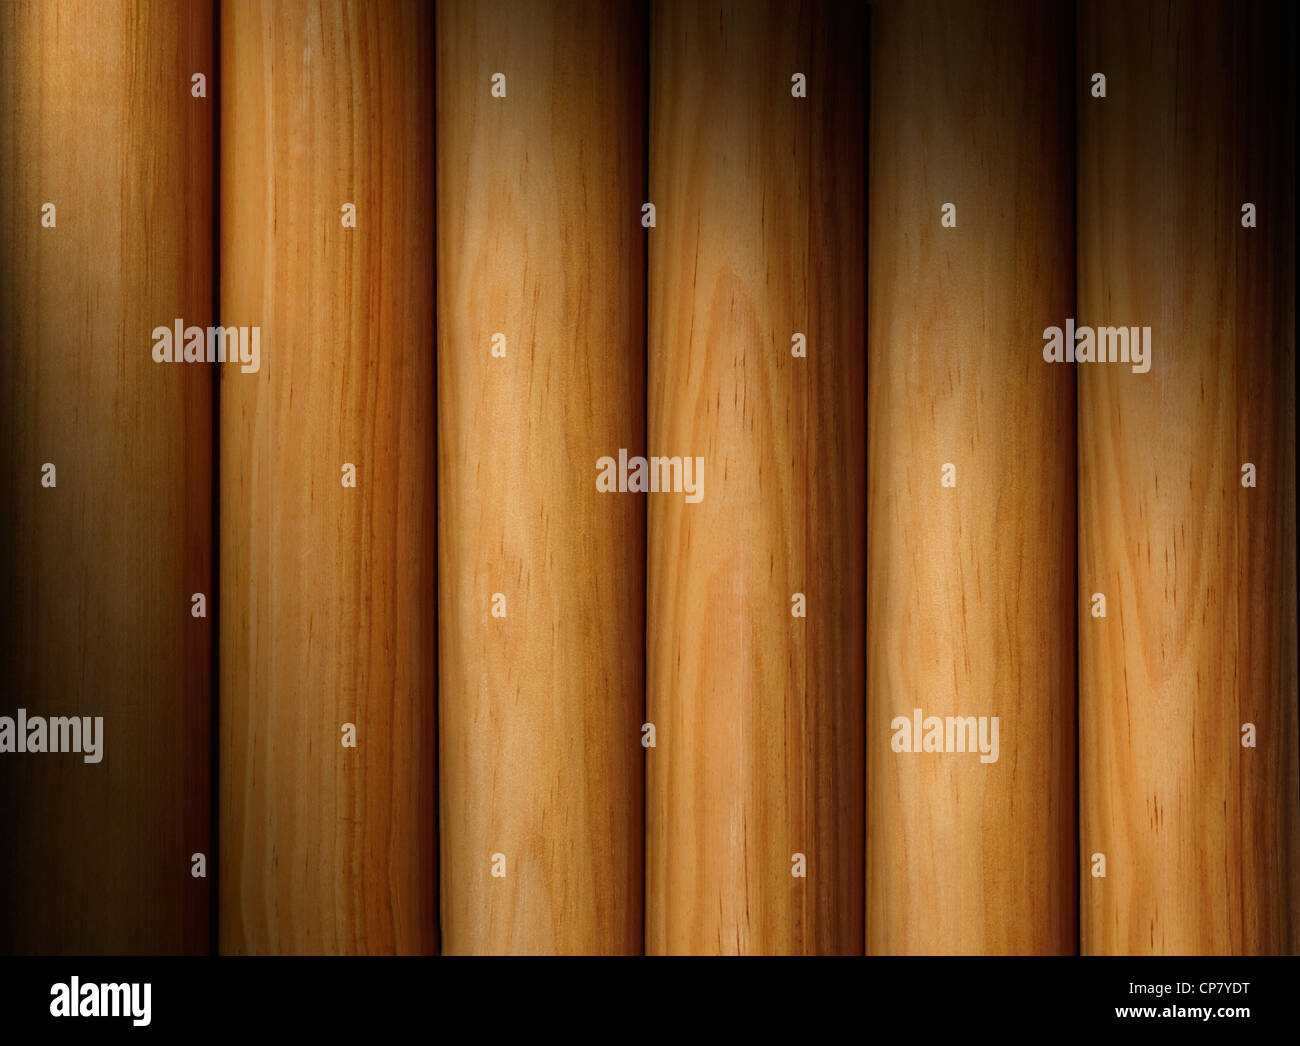 Wooden poles forming a background texture lit diagonally Stock Photo